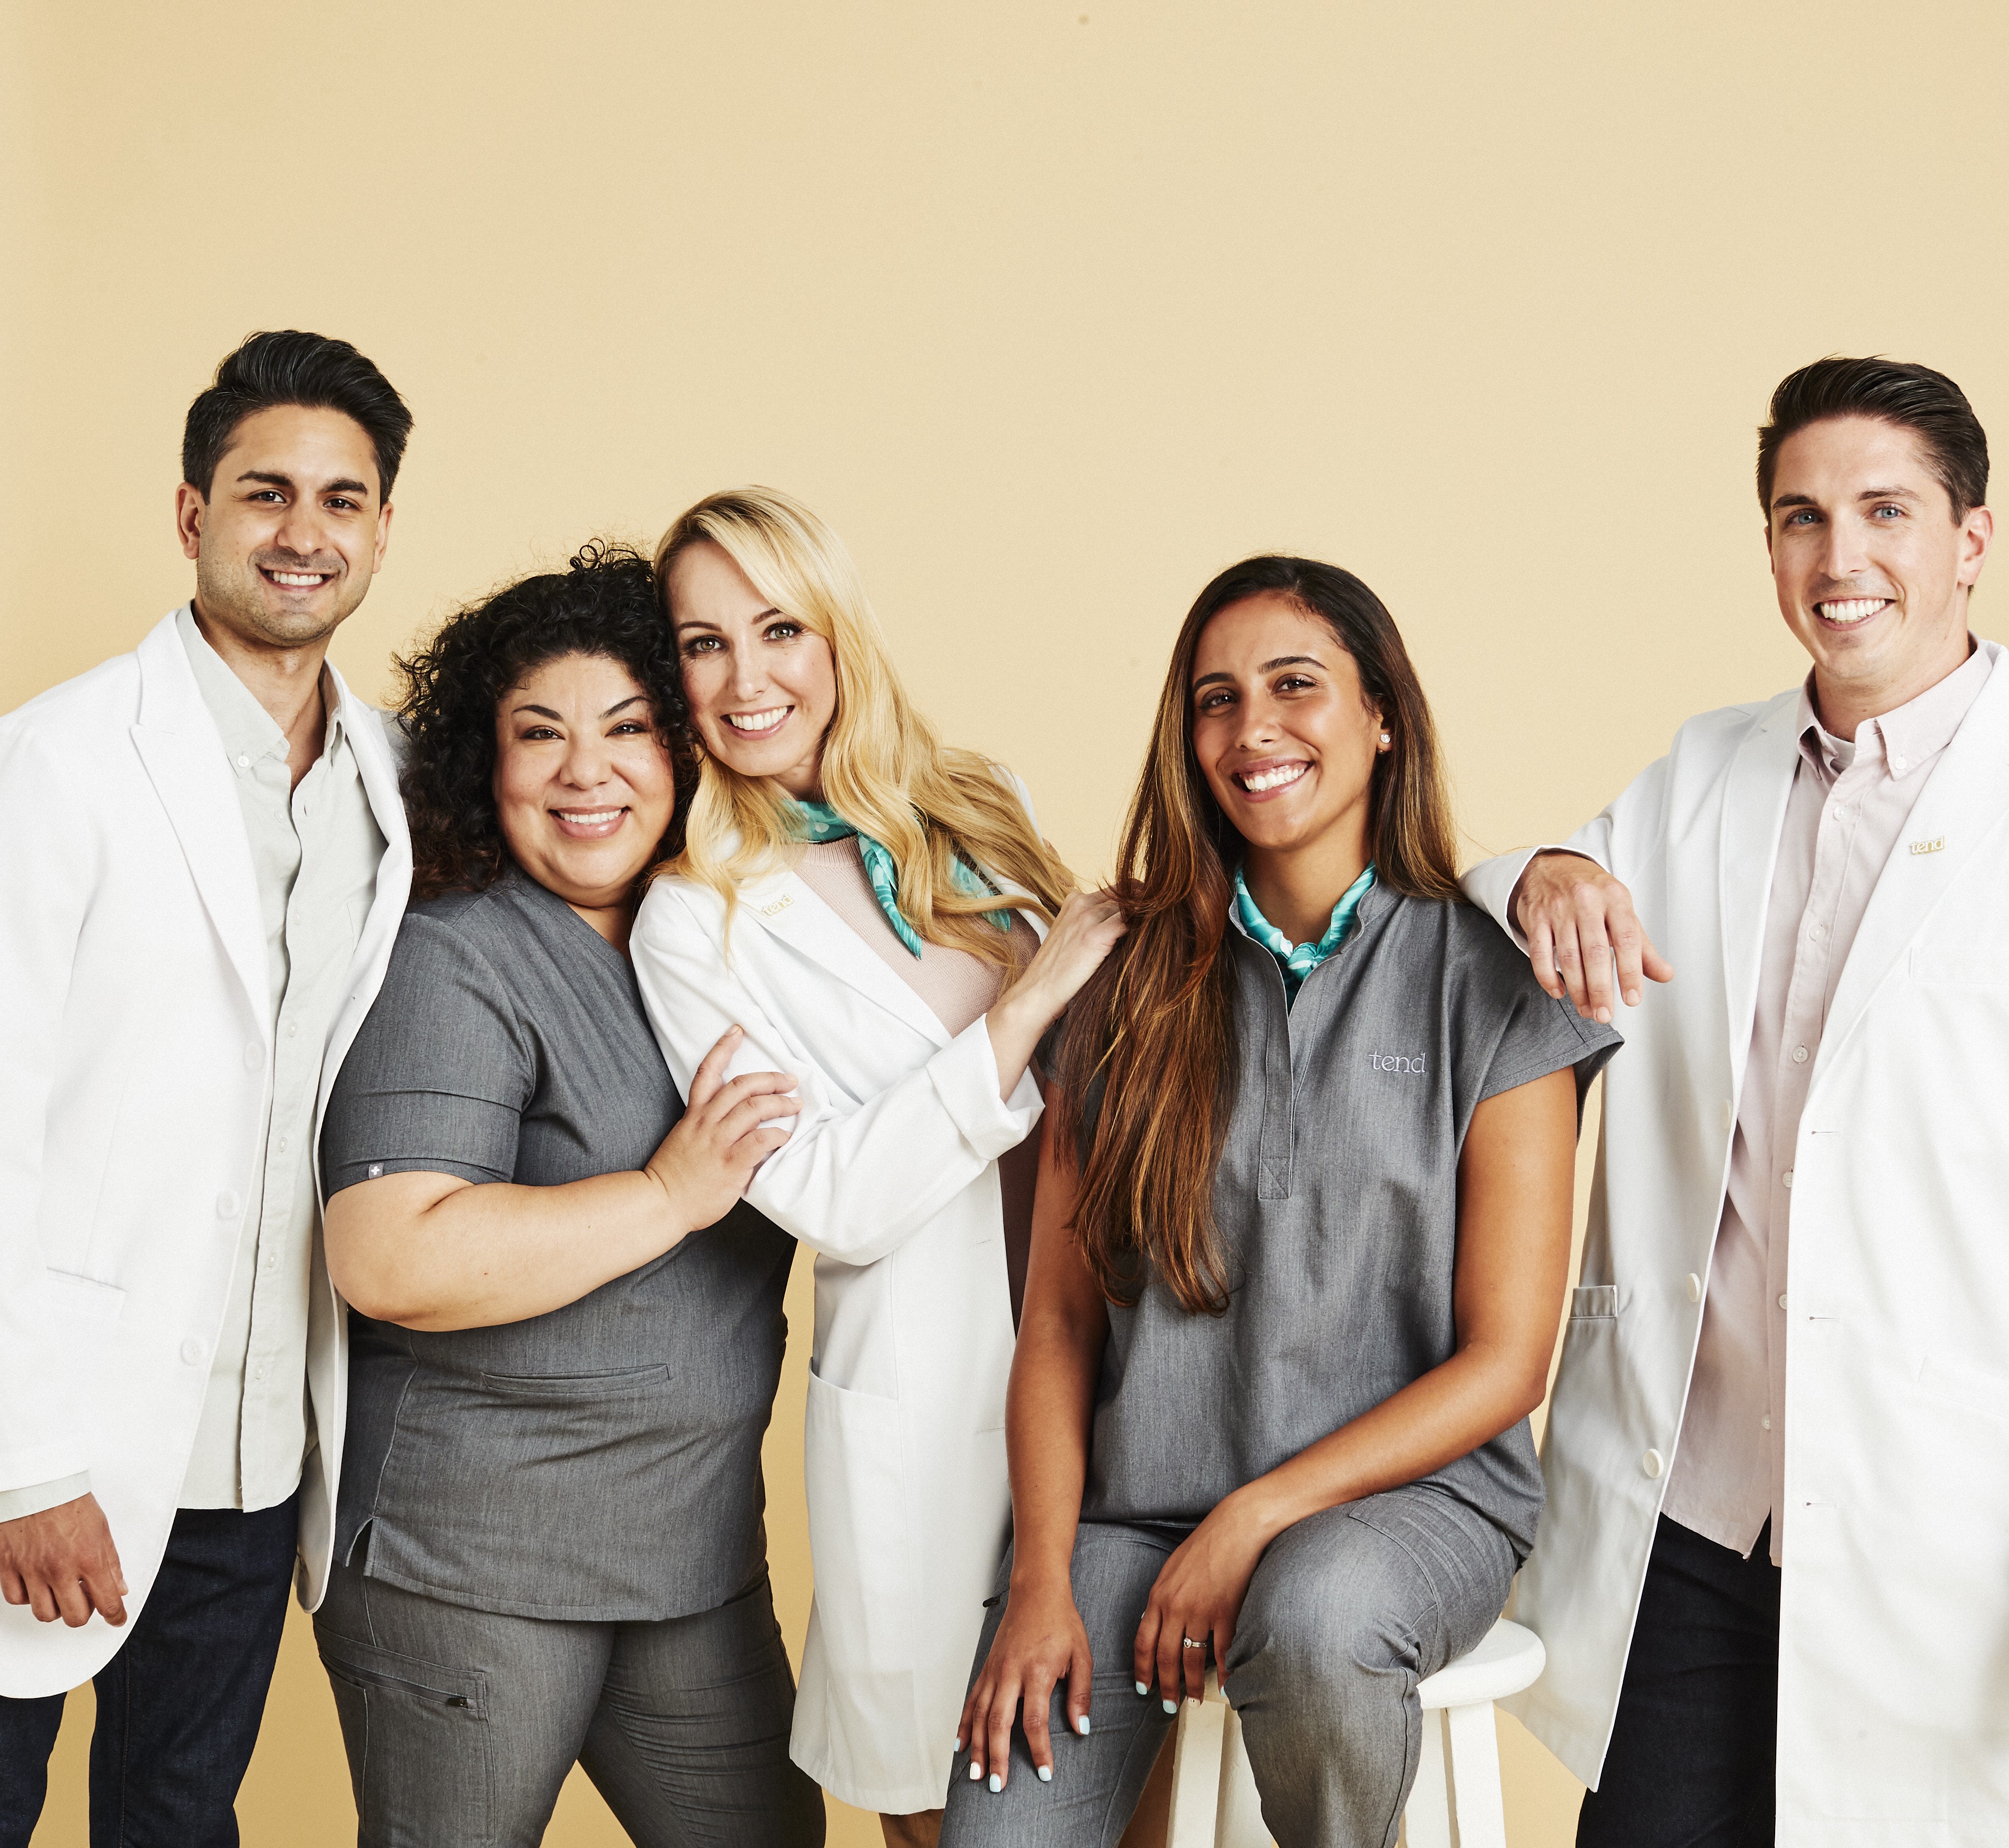 group photo of smiling Tend hygienists and dentists